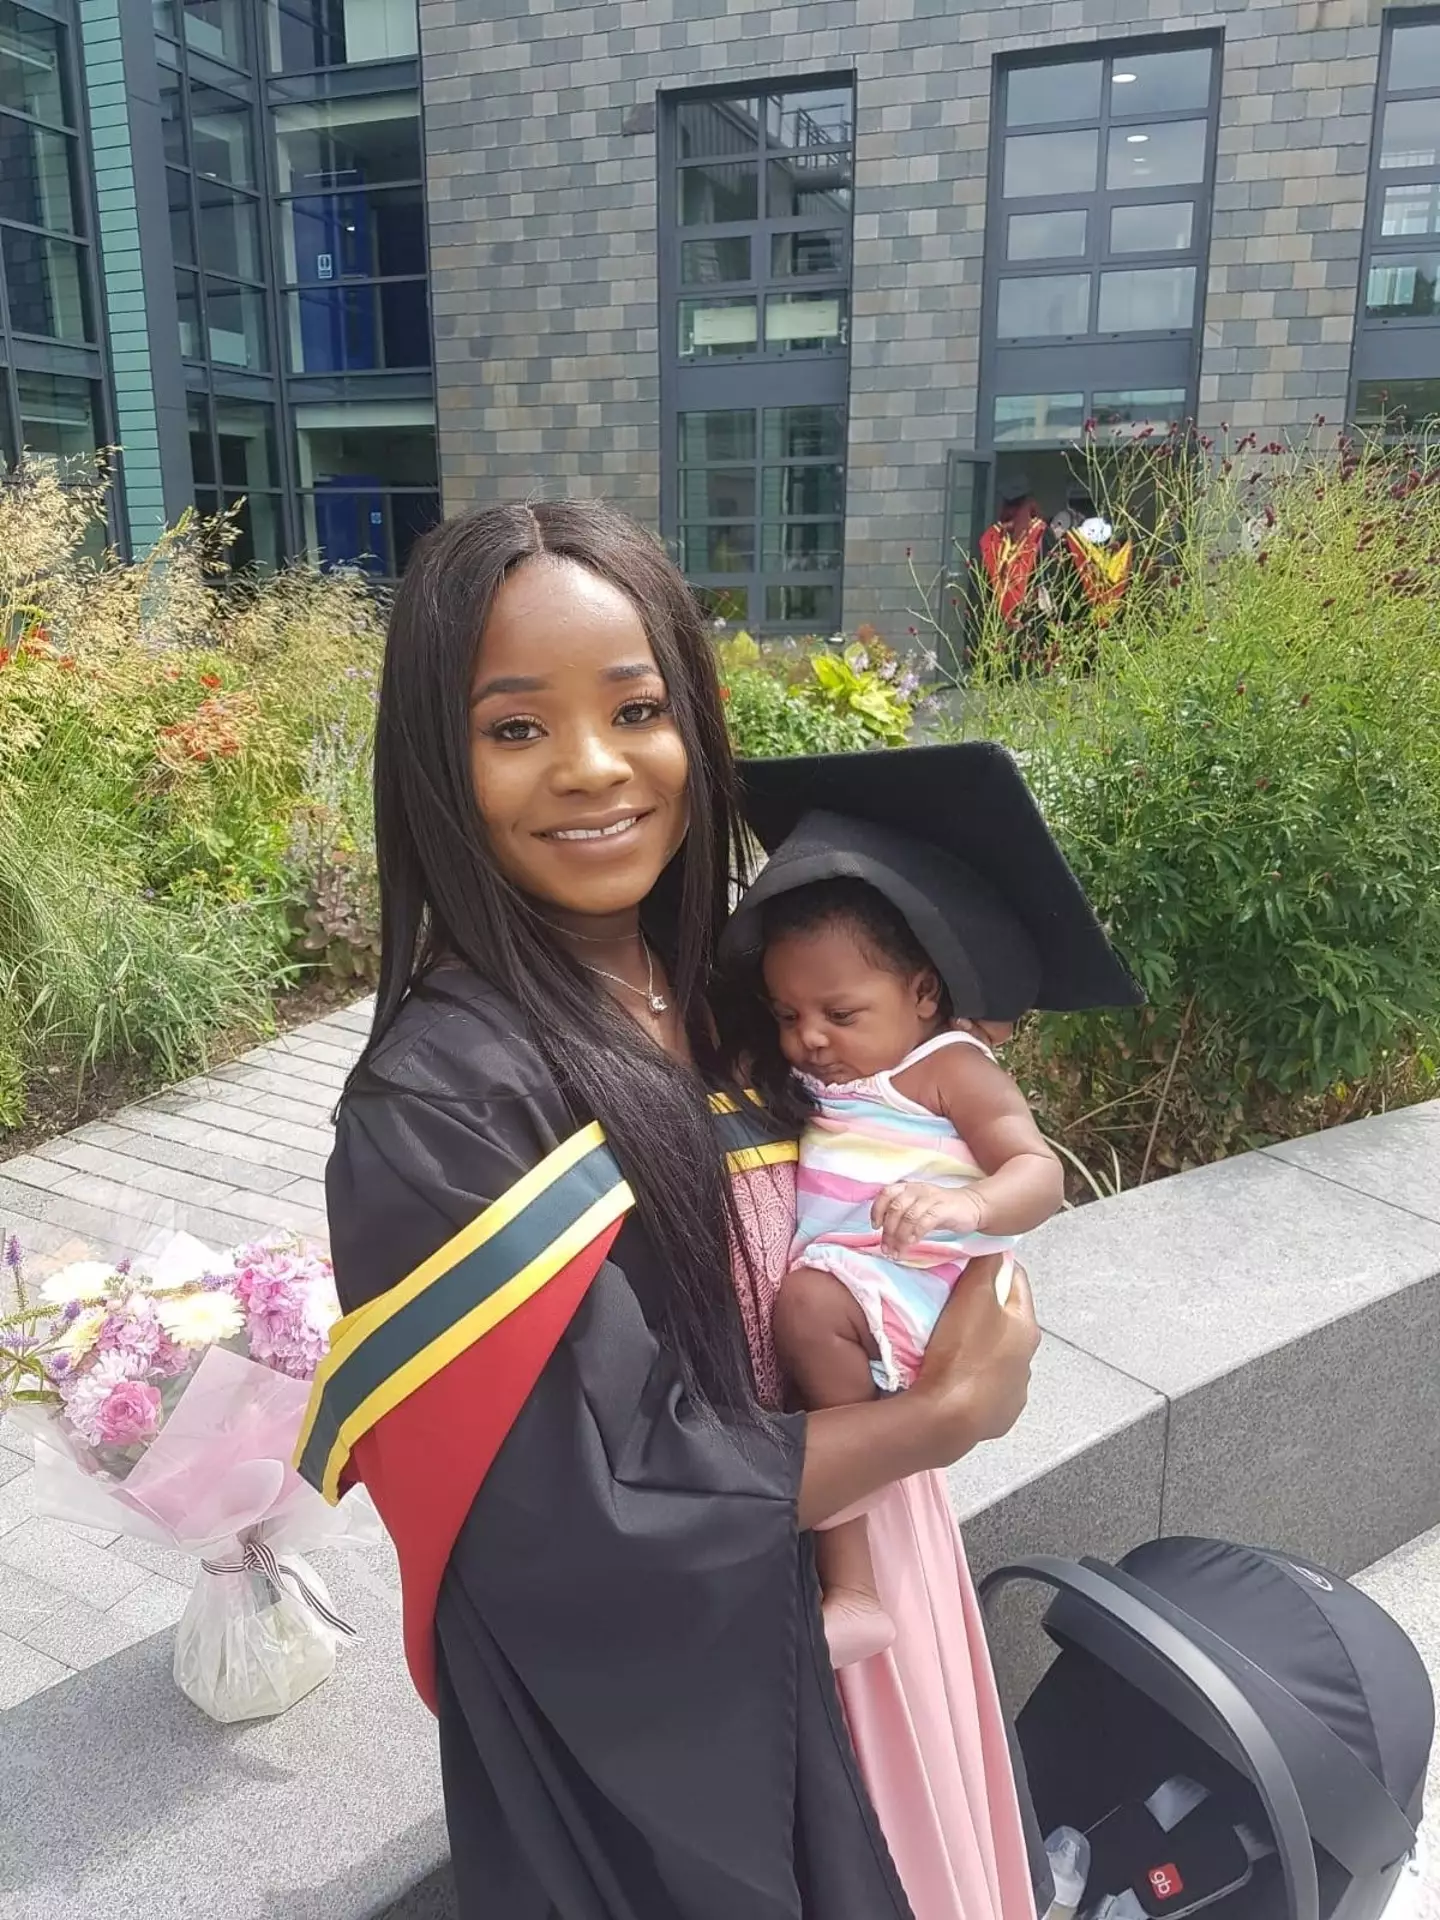 Law graduate Flore was initially hesitant about taking the Covid-19 vaccine (